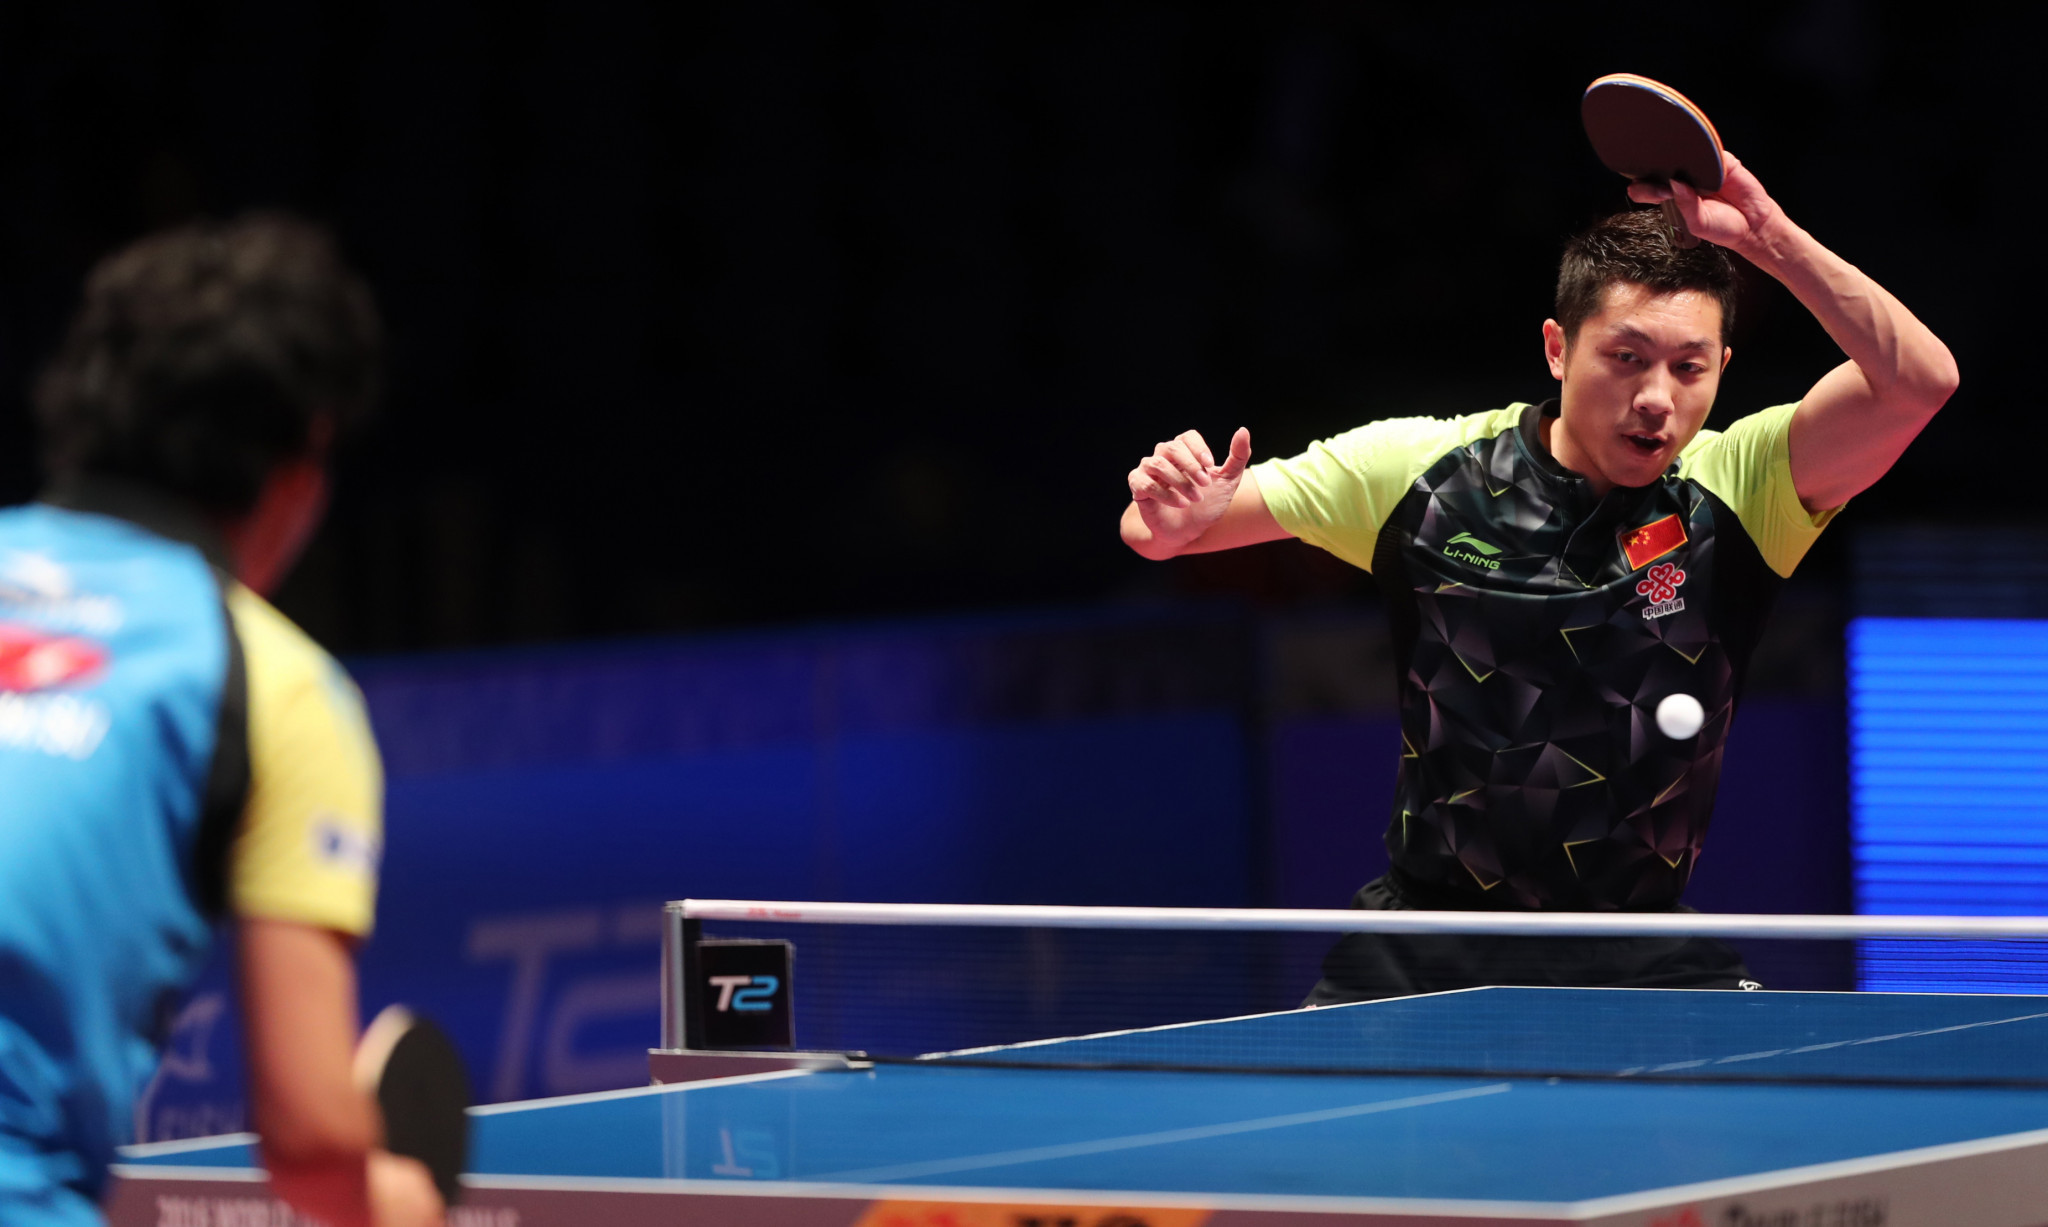 The ITTF and Eurosport have continued their partnership ©Getty Images